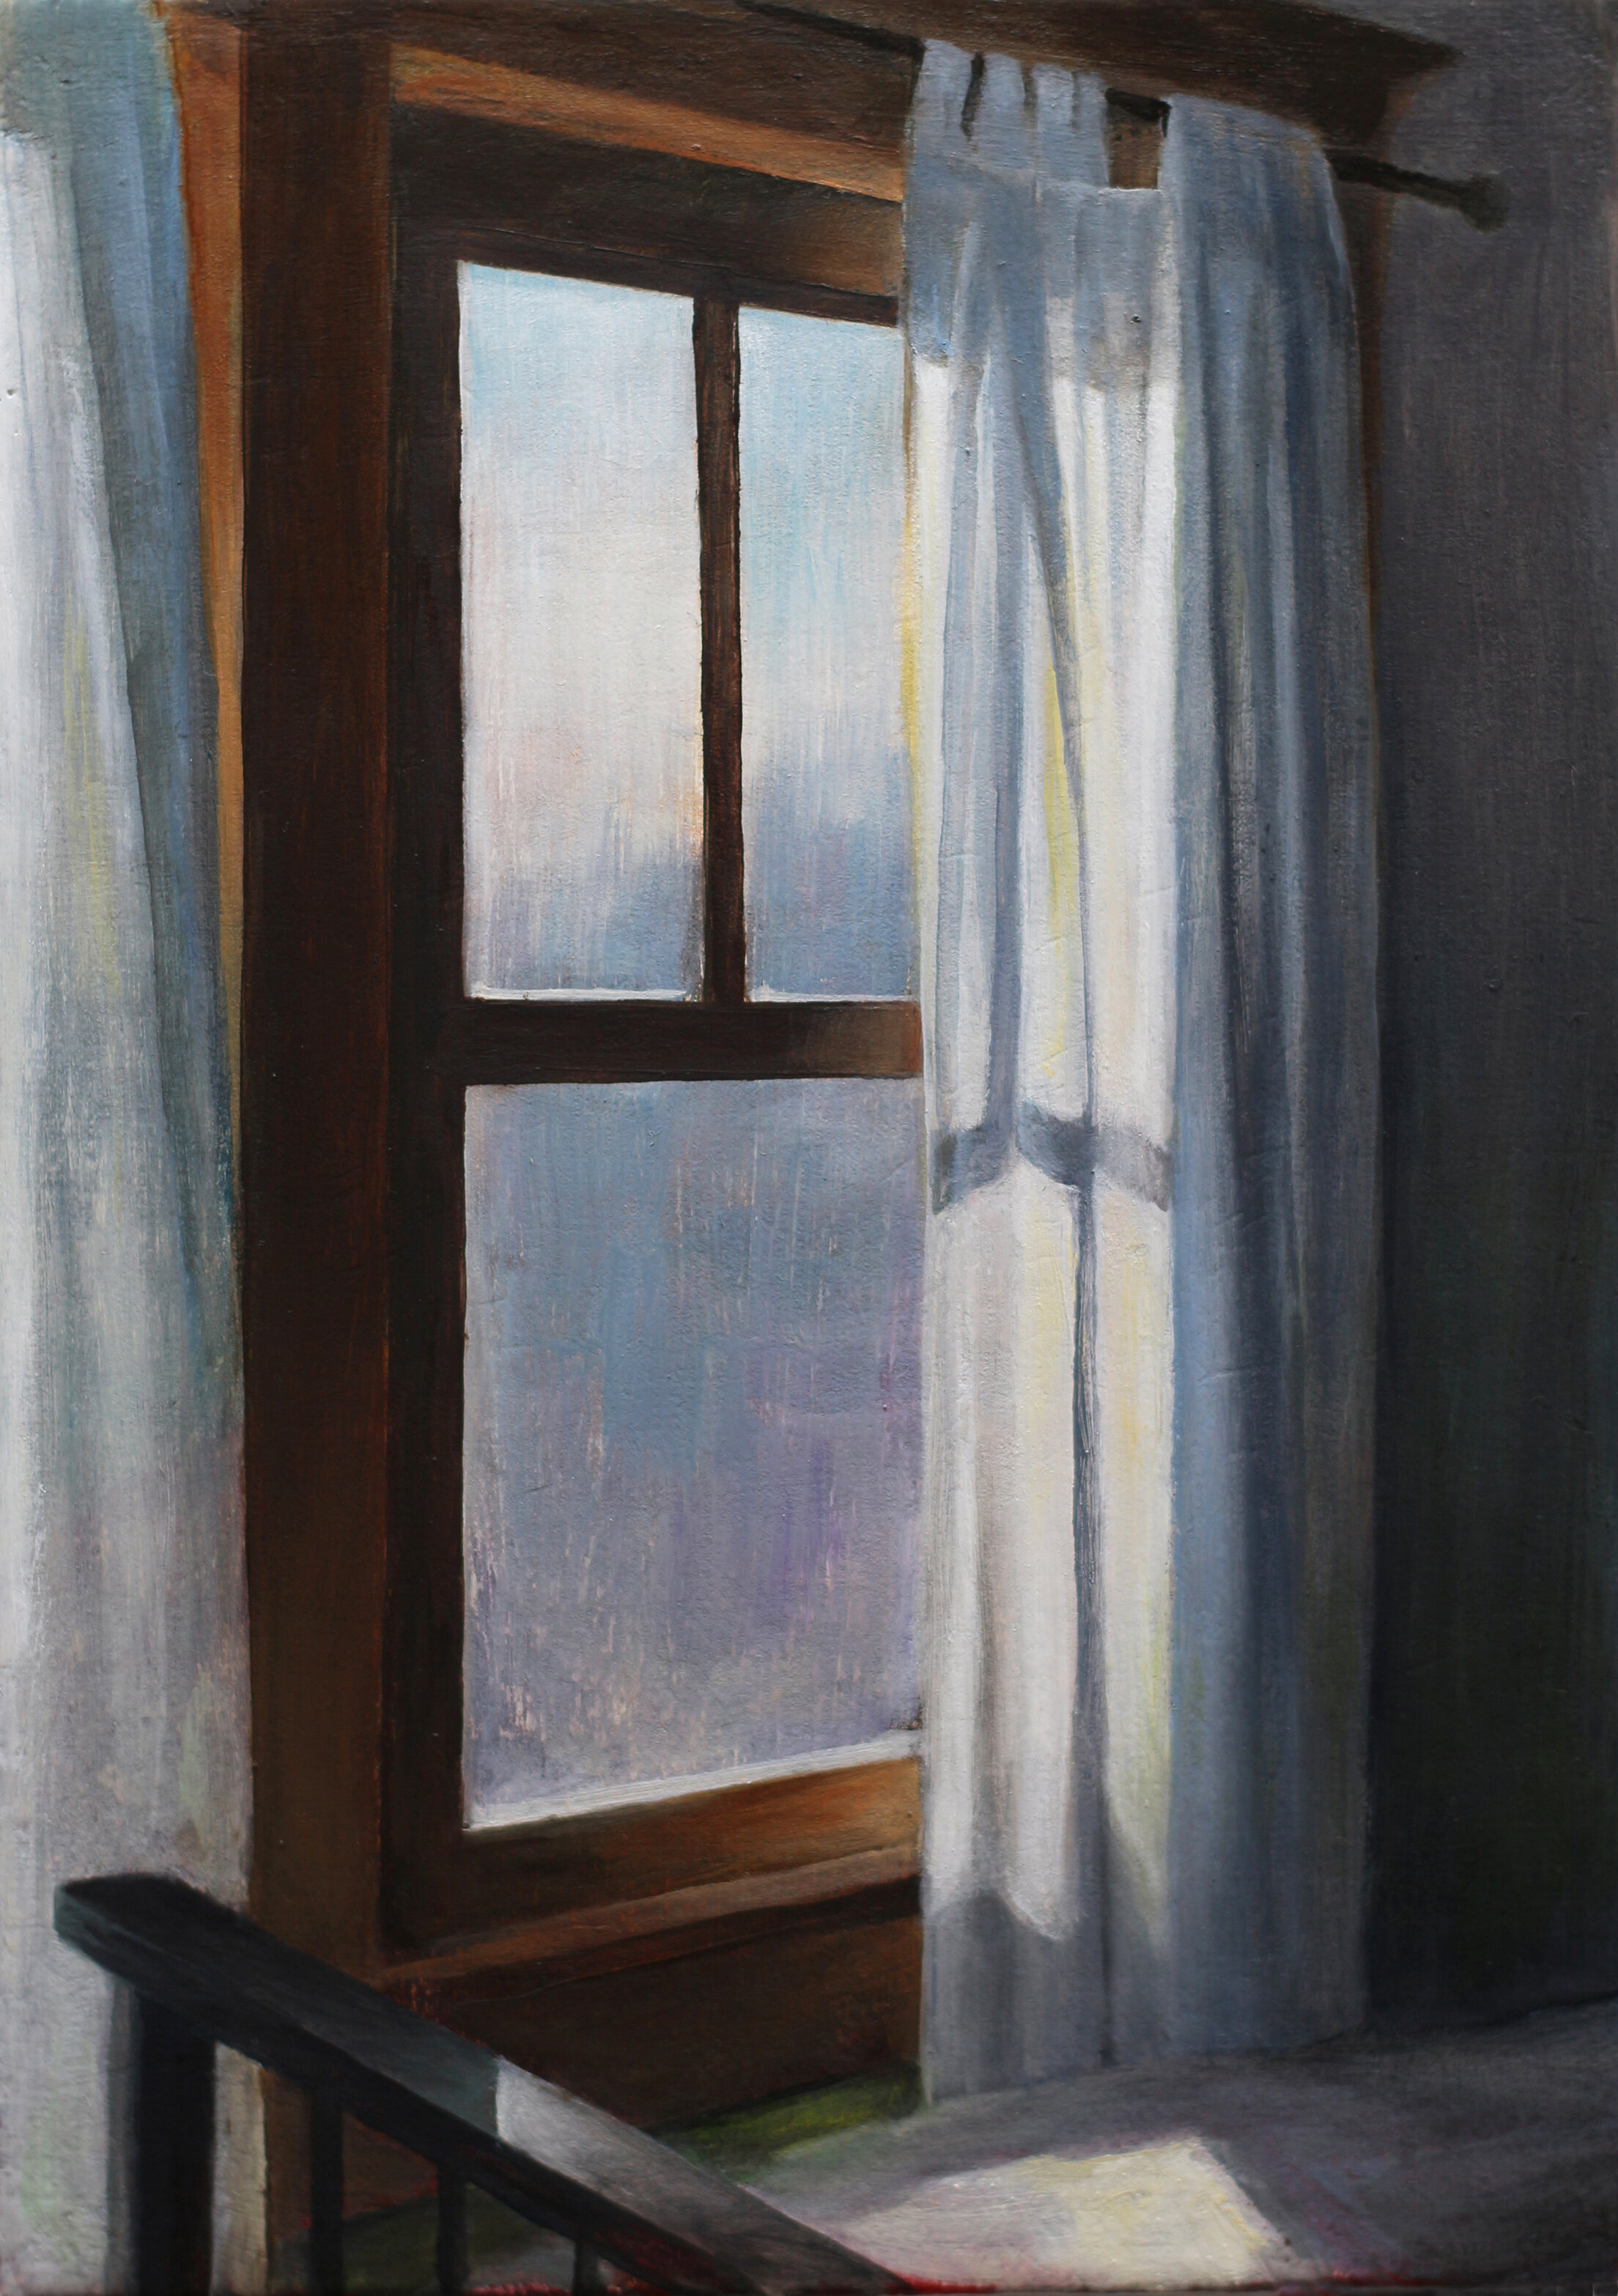   Window   2020  Oil on linen over panel  7 x 5 inches       